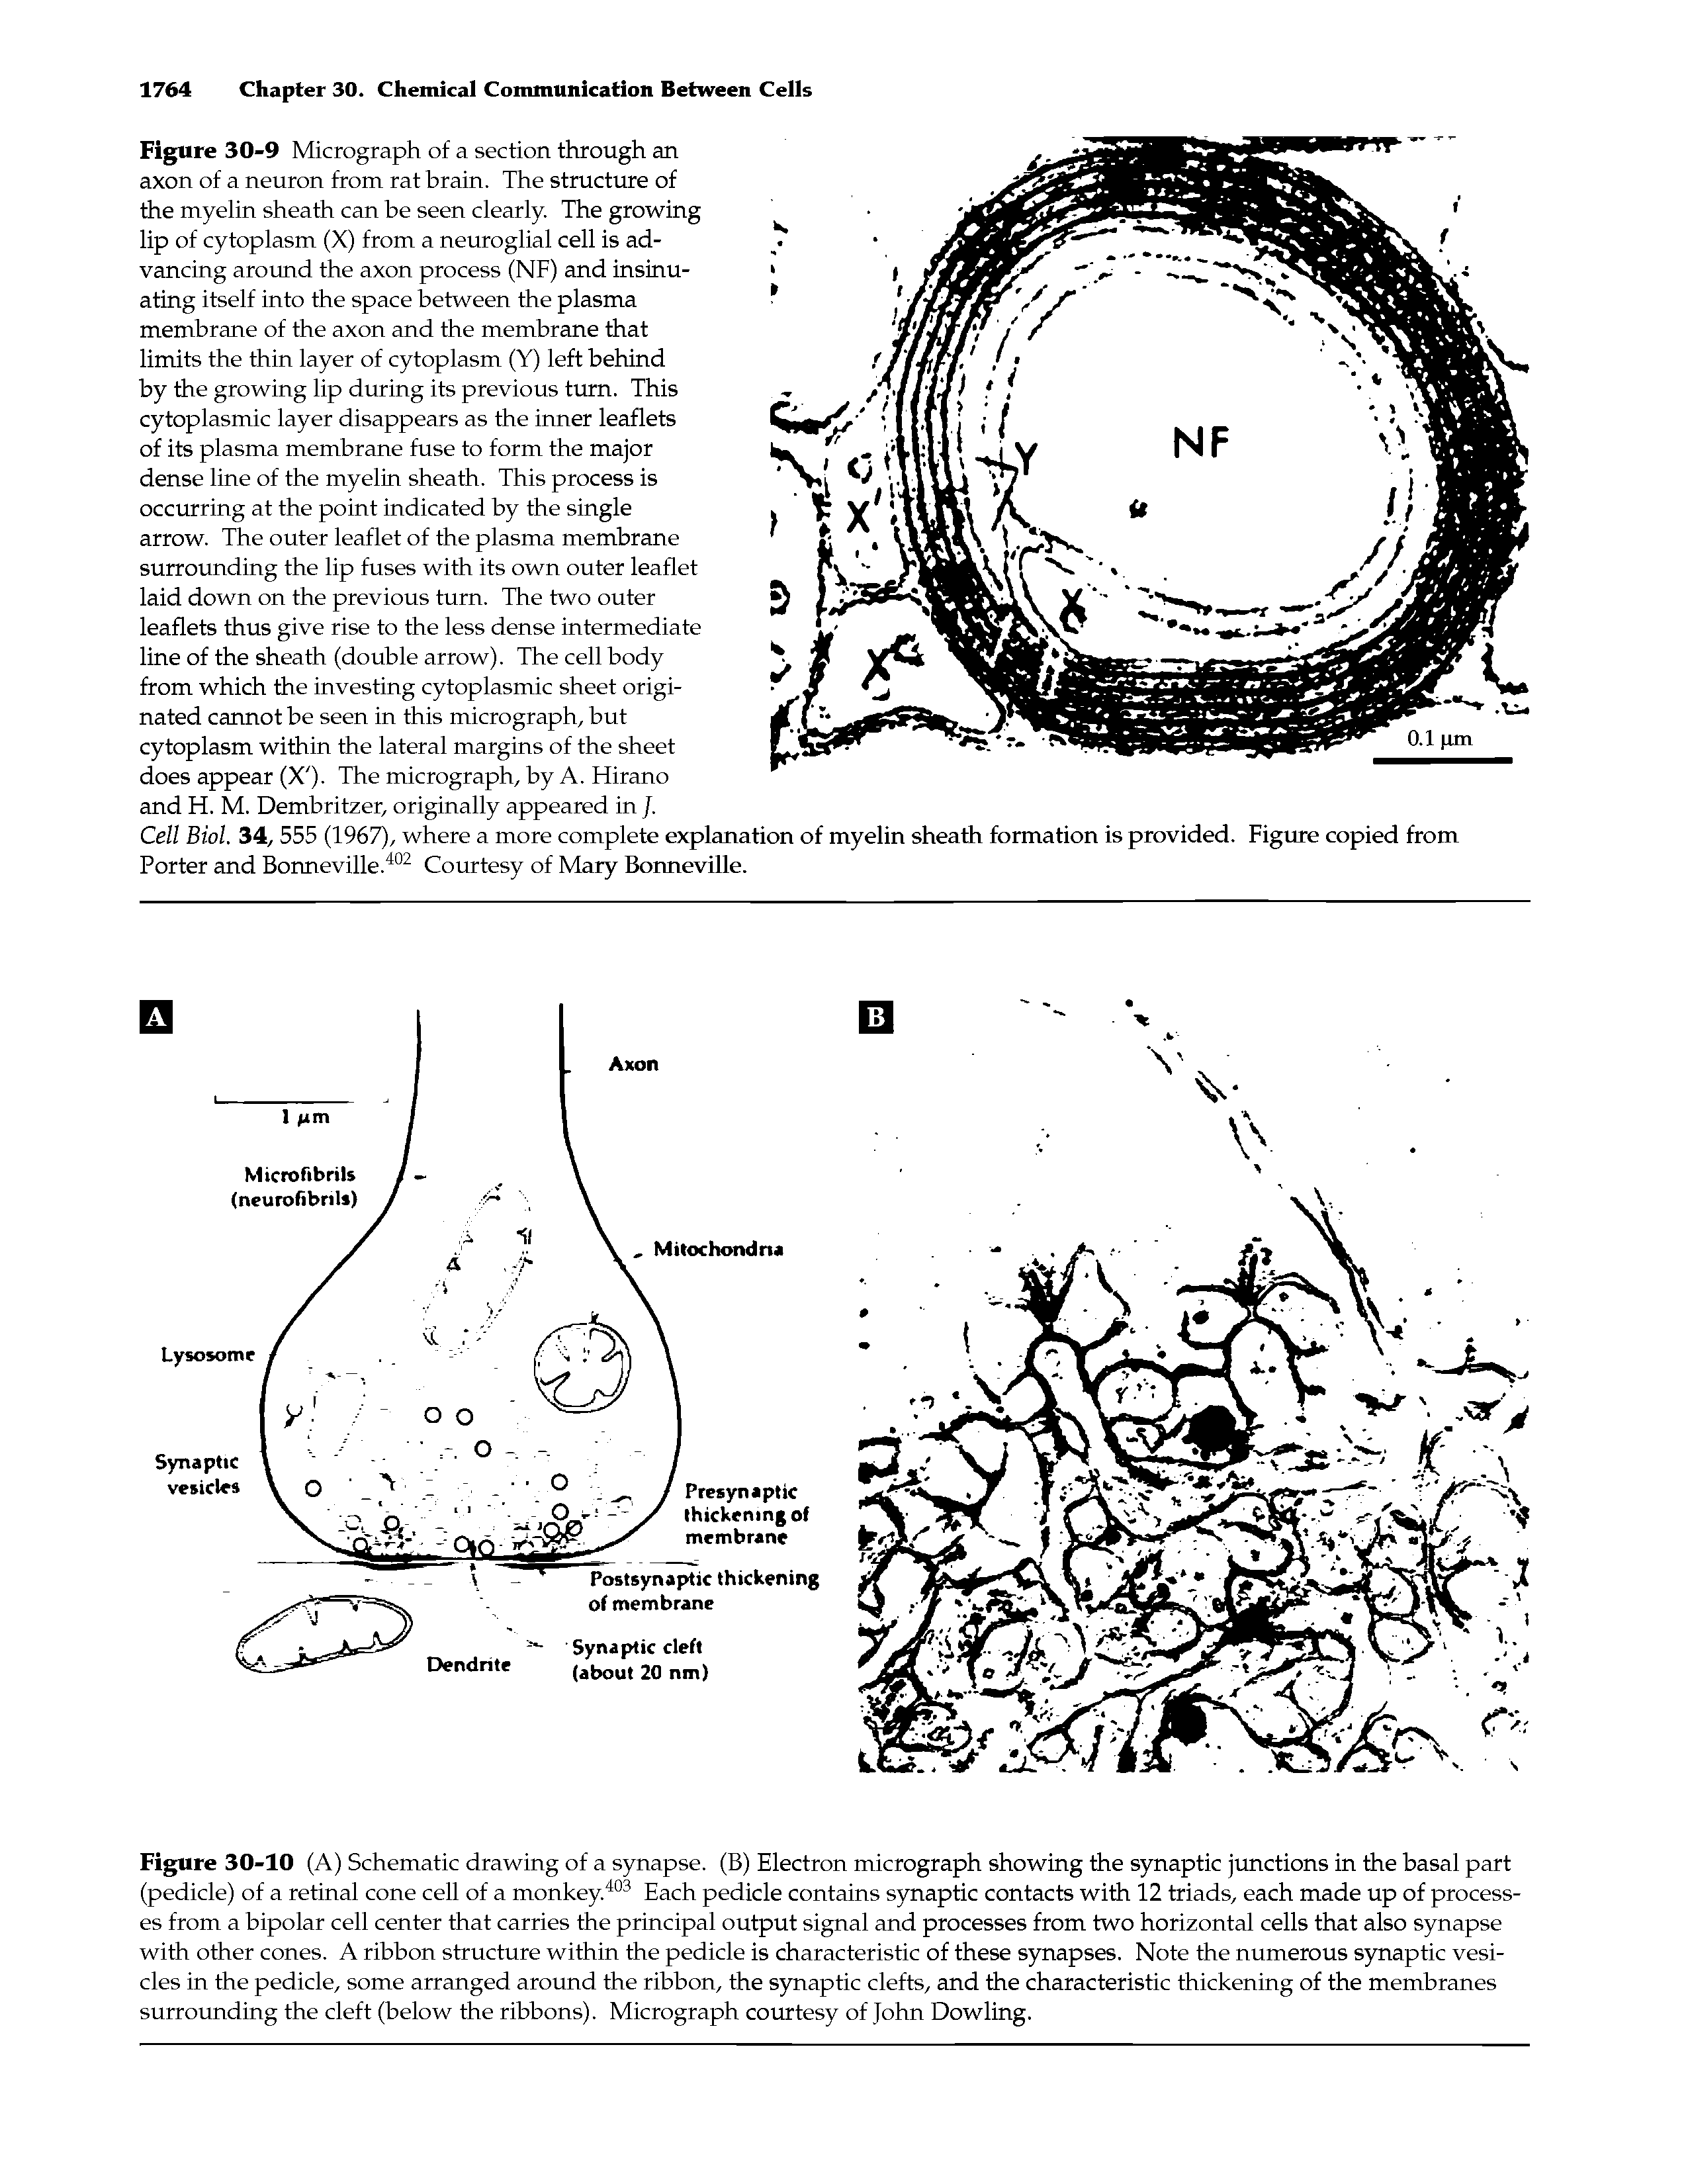 Figure 30-10 (A) Schematic drawing of a synapse. (B) Electron micrograph showing the synaptic junctions in the basal part (pedicle) of a retinal cone cell of a monkey.403 Each pedicle contains synaptic contacts with 12 triads, each made up of processes from a bipolar cell center that carries the principal output signal and processes from two horizontal cells that also synapse with other cones. A ribbon structure within the pedicle is characteristic of these synapses. Note the numerous synaptic vesicles in the pedicle, some arranged around the ribbon, the synaptic clefts, and the characteristic thickening of the membranes surrounding the cleft (below the ribbons). Micrograph courtesy of John Dowling.